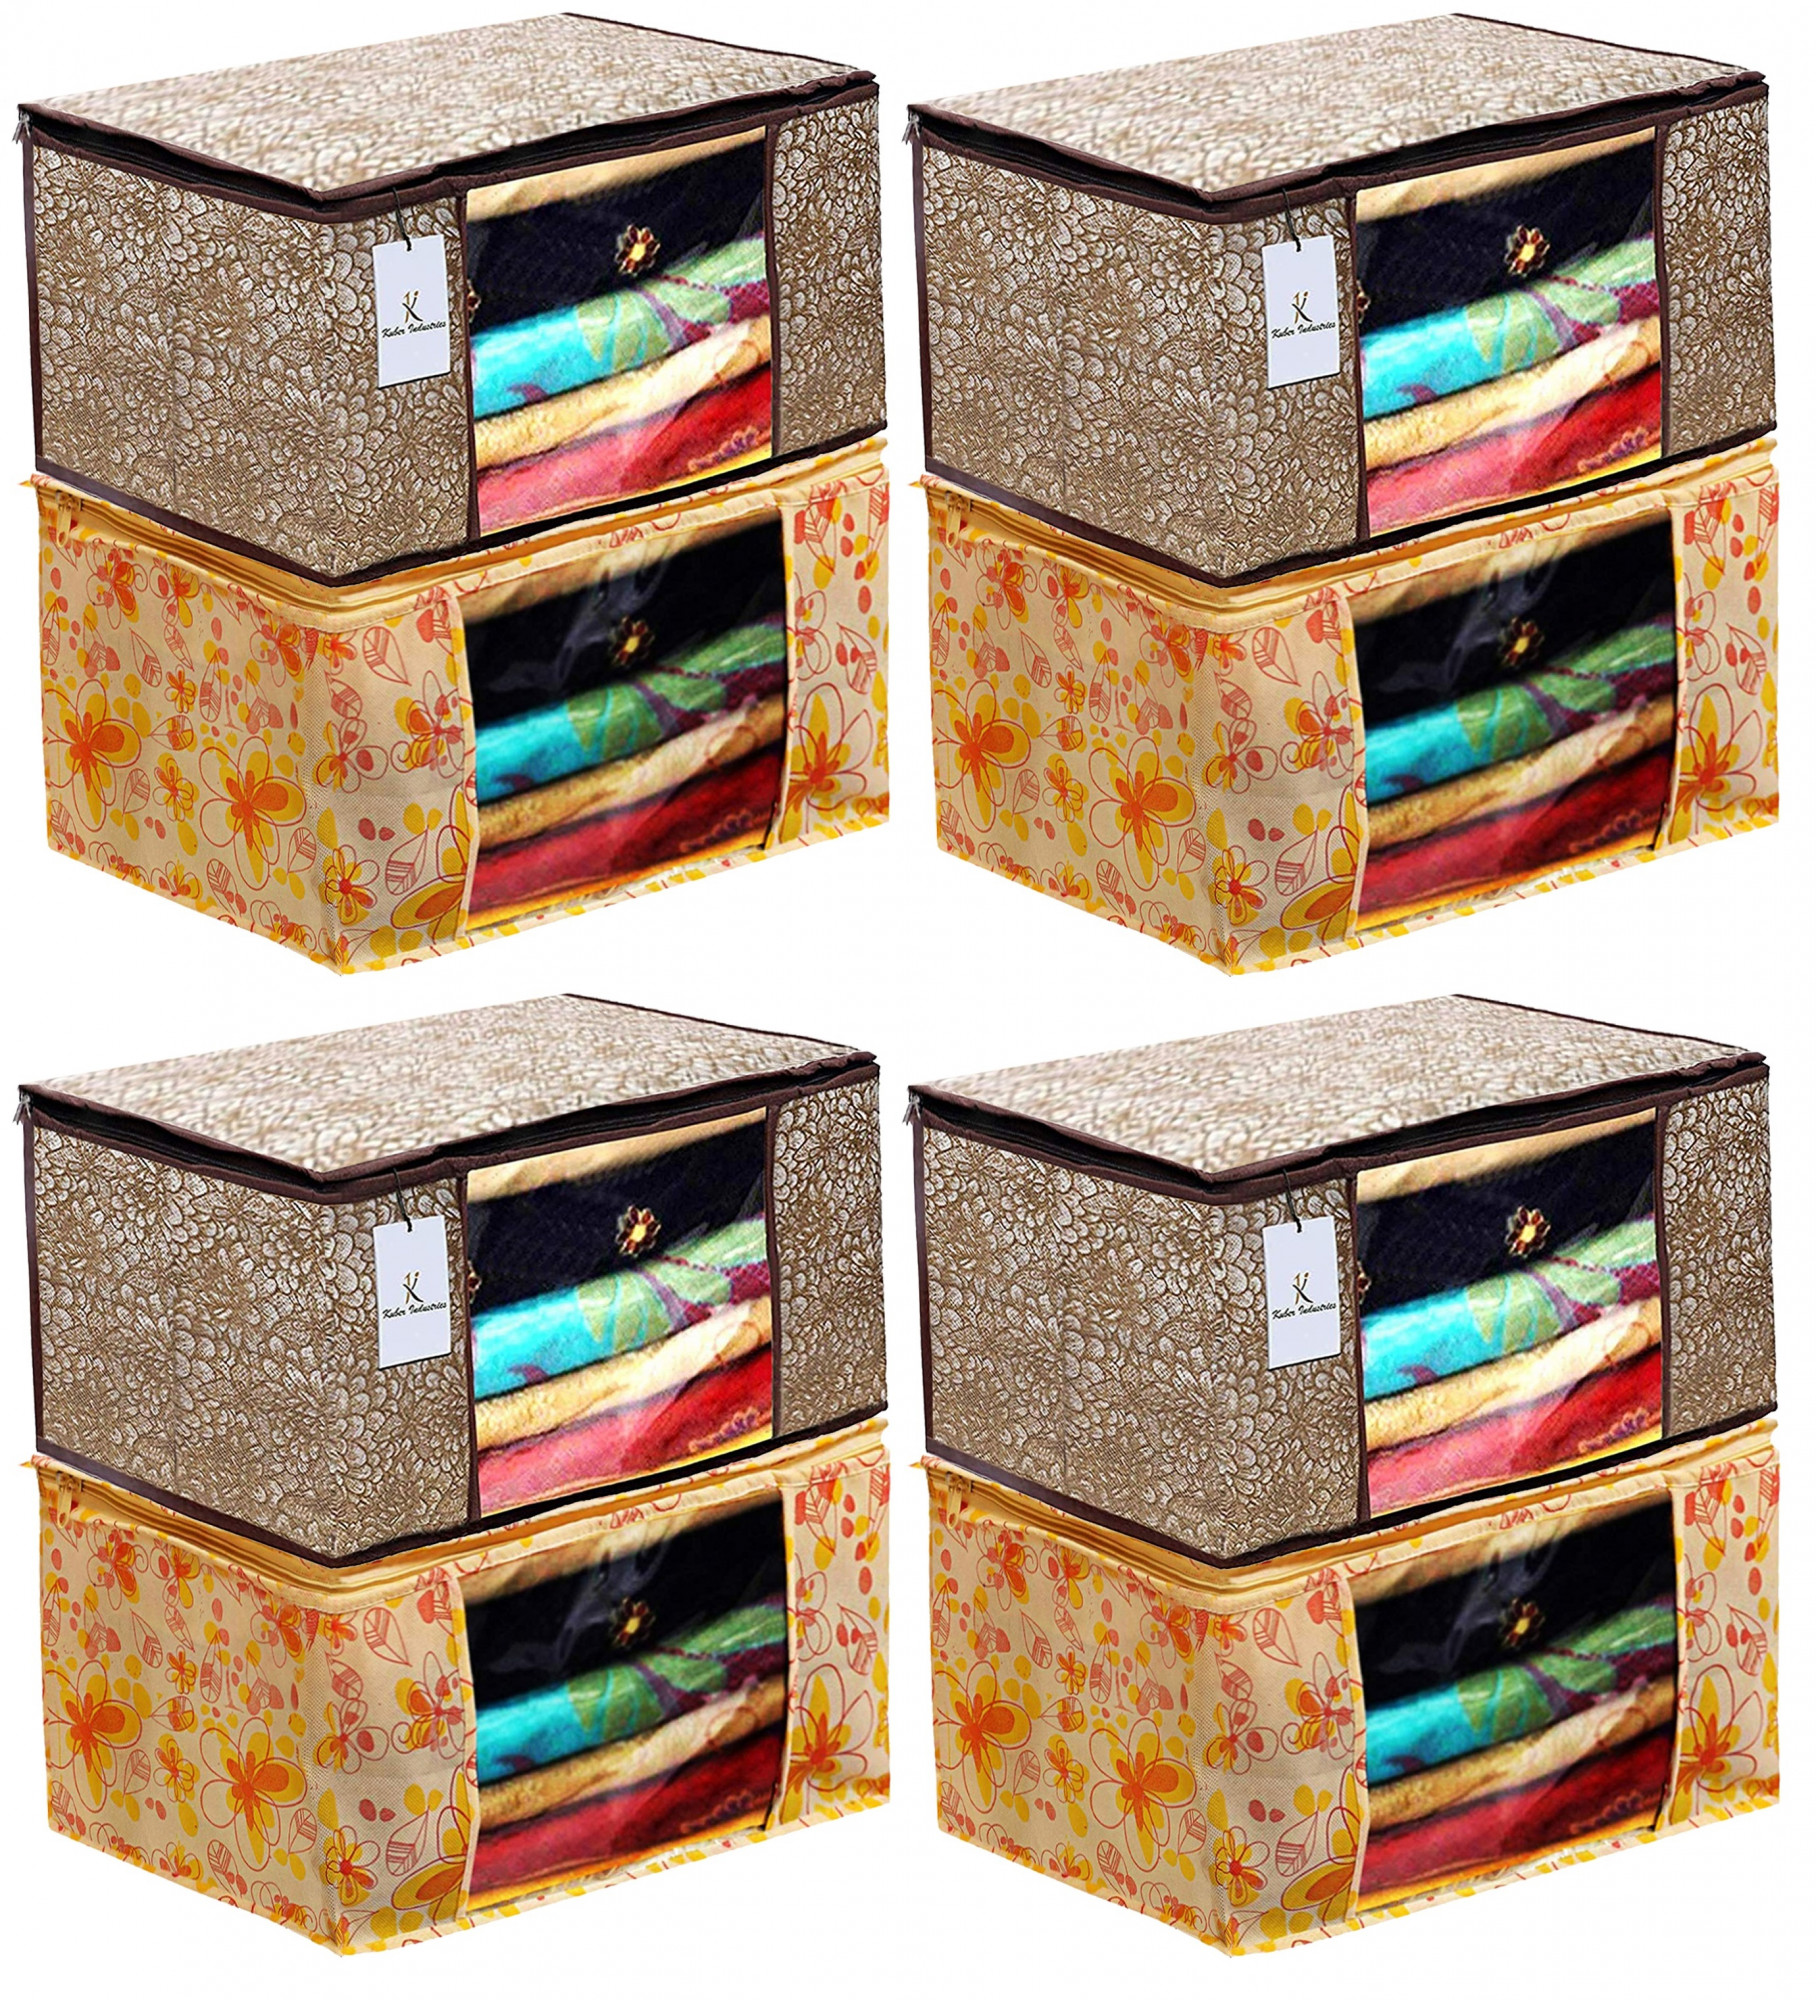 Kuber Industries Metalic Printed Non Woven Fabric Saree Cover Set with Transparent Window, Extra Large, Ivory Red & Golden Brown -CTKTC40771